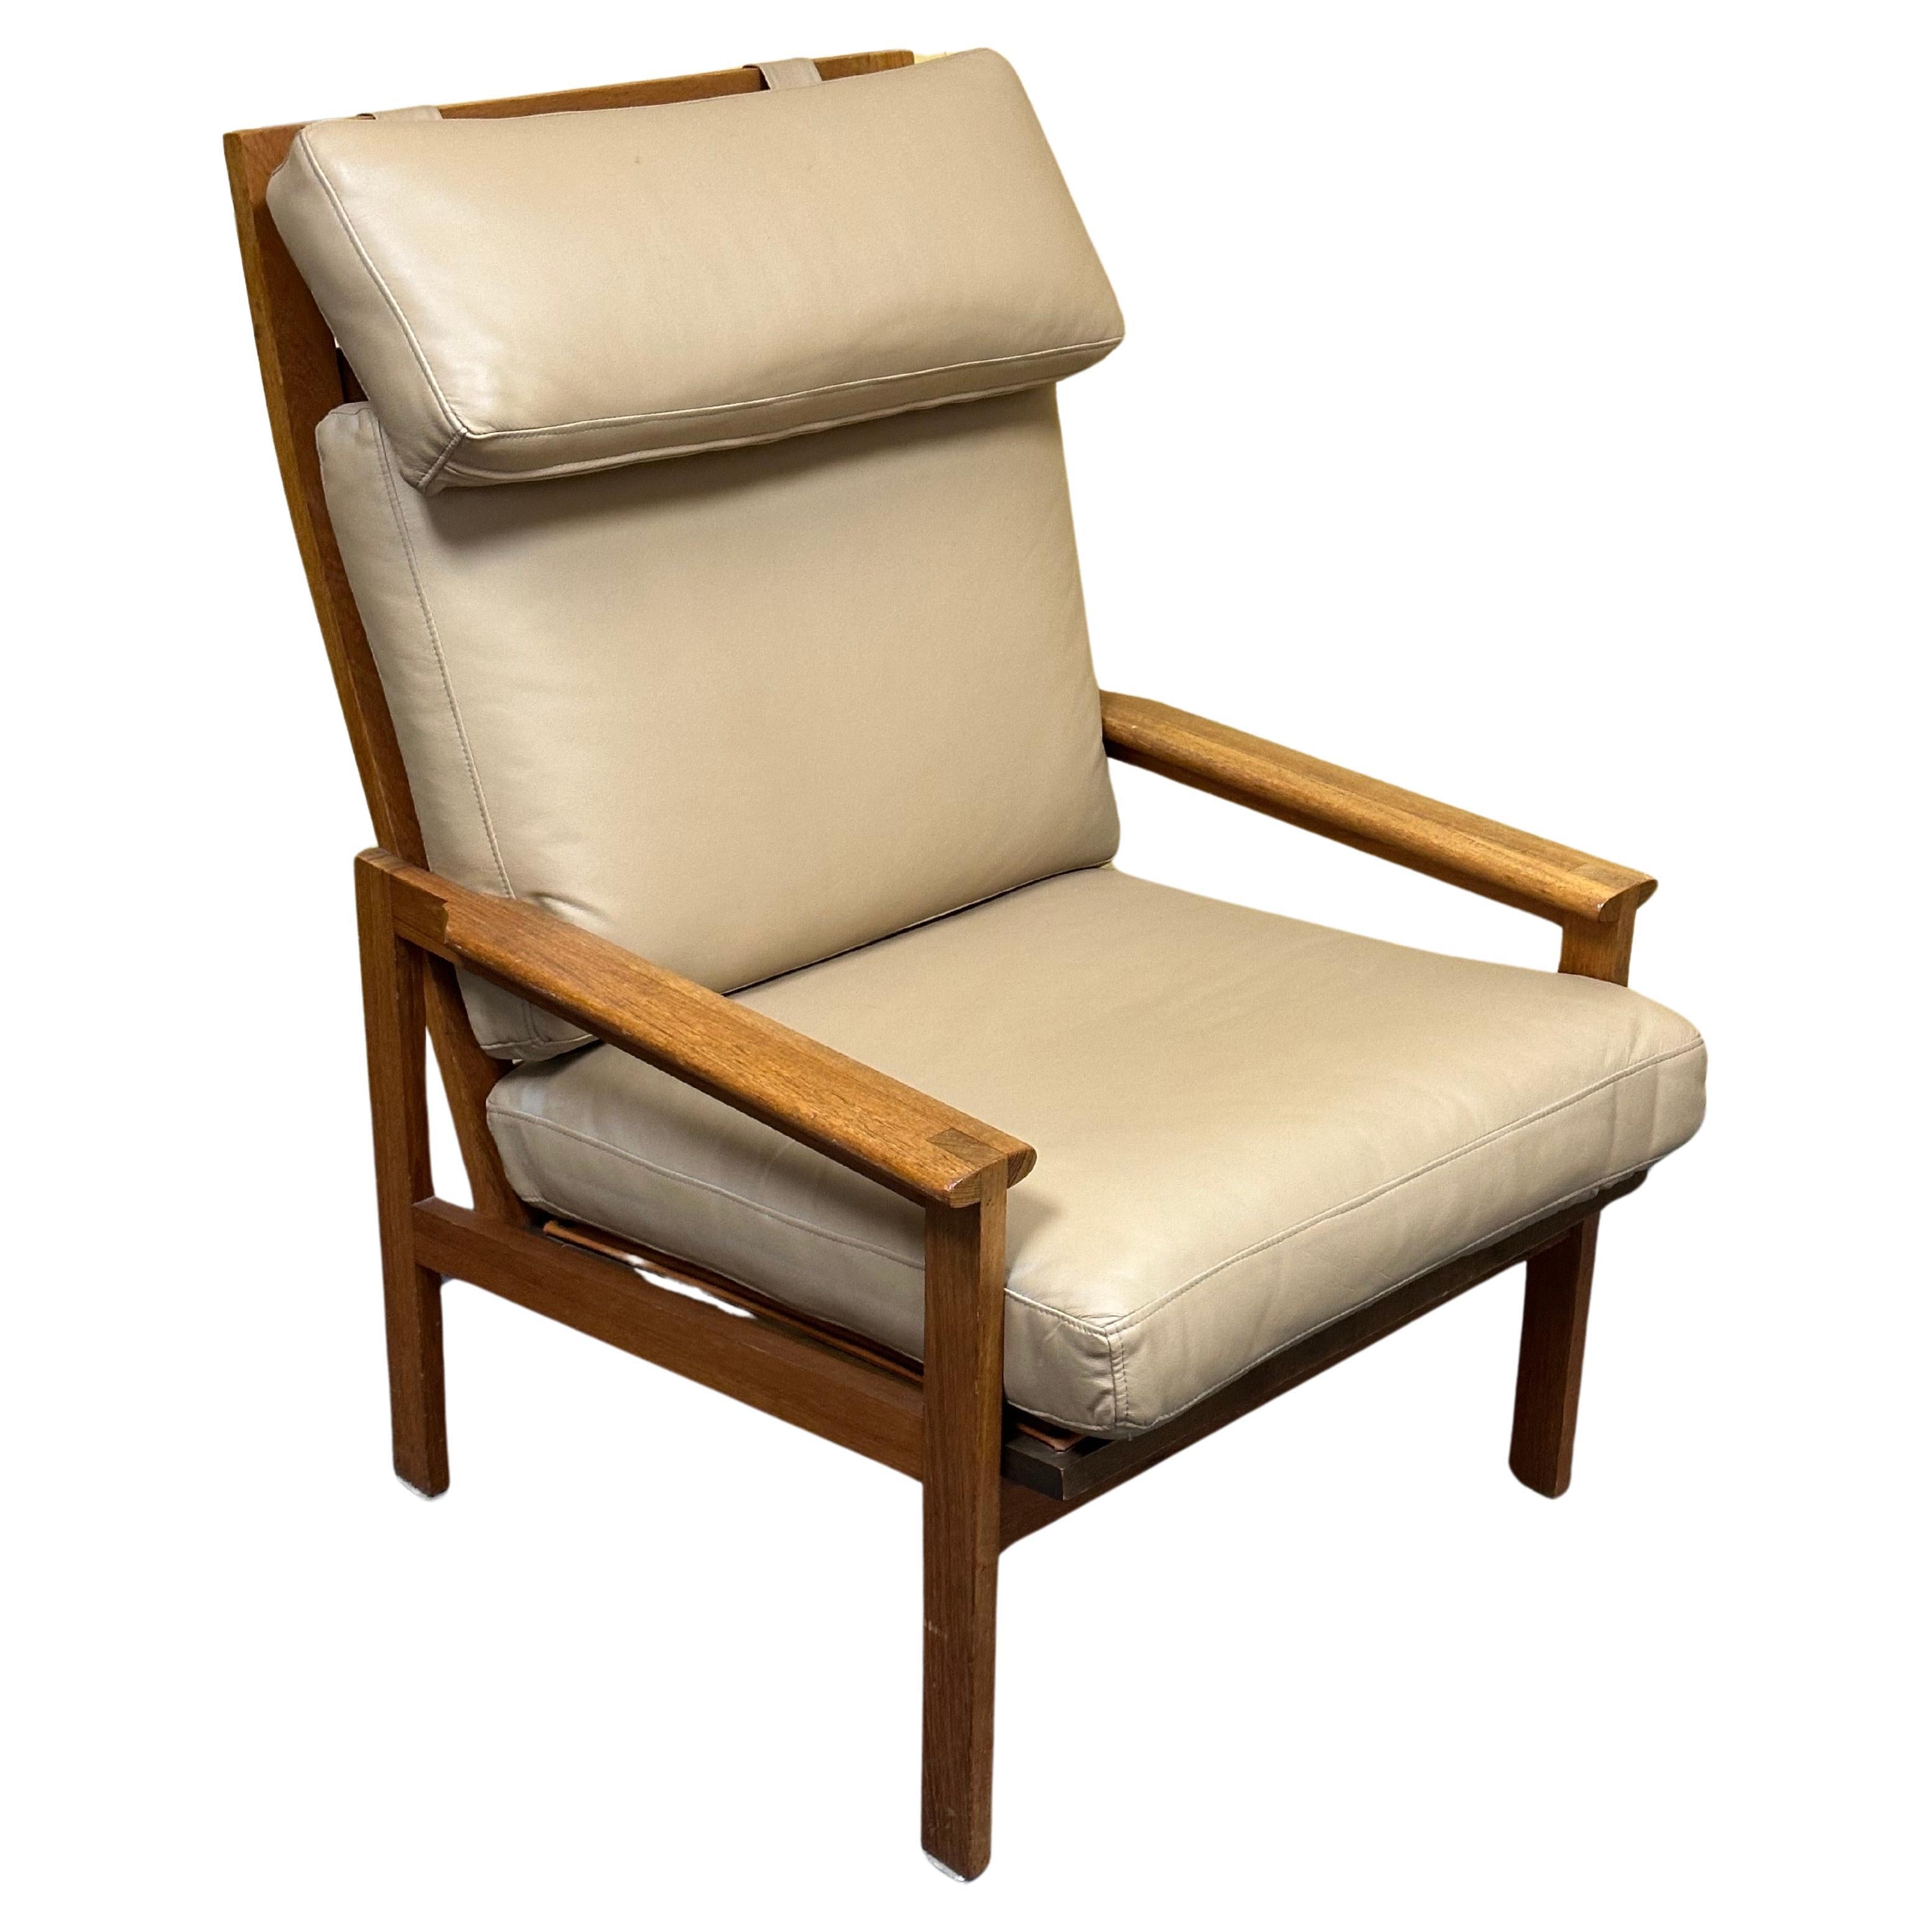 Striking Danish modern solid teak and leather high back armchair by Niels Eilersen, circa 1970s. The chair is in very good vintage condition and measures 26.5